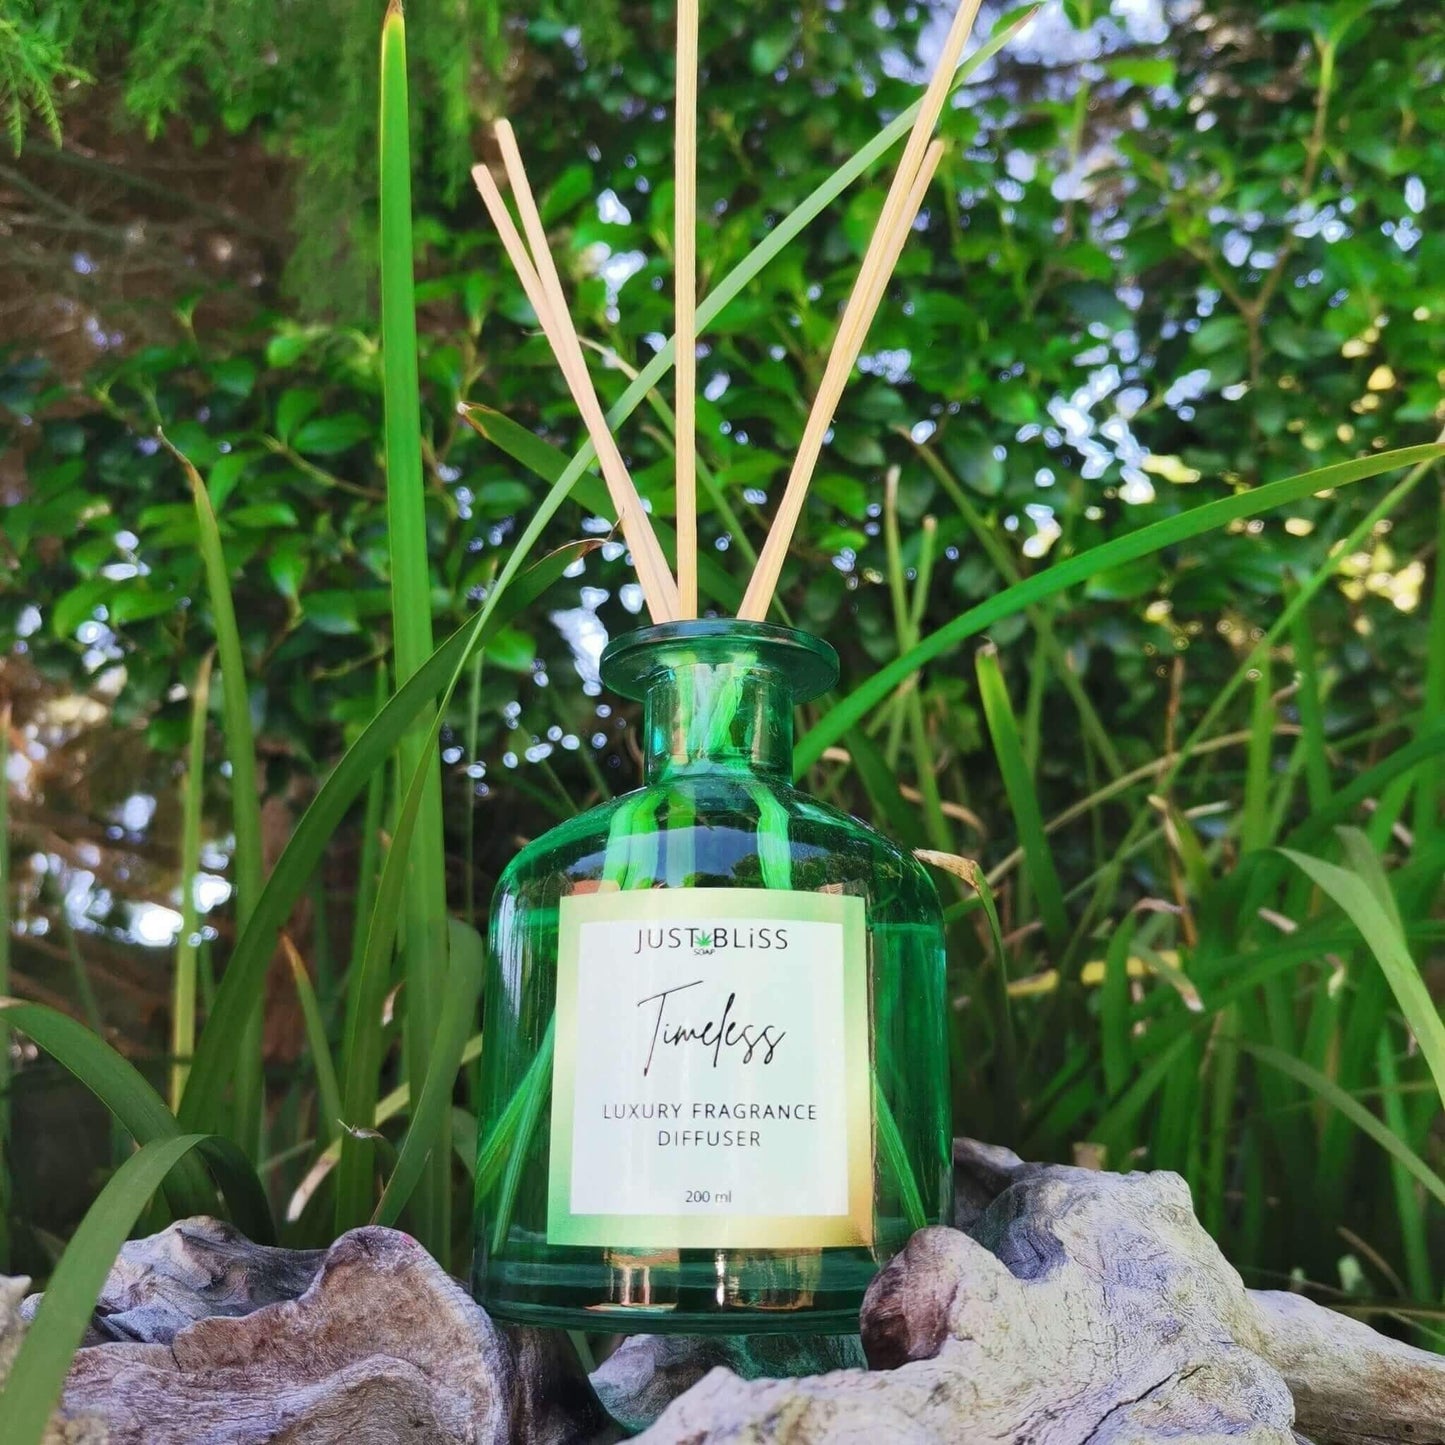 JUSTBLISS: REED DIFFUSER: timeless